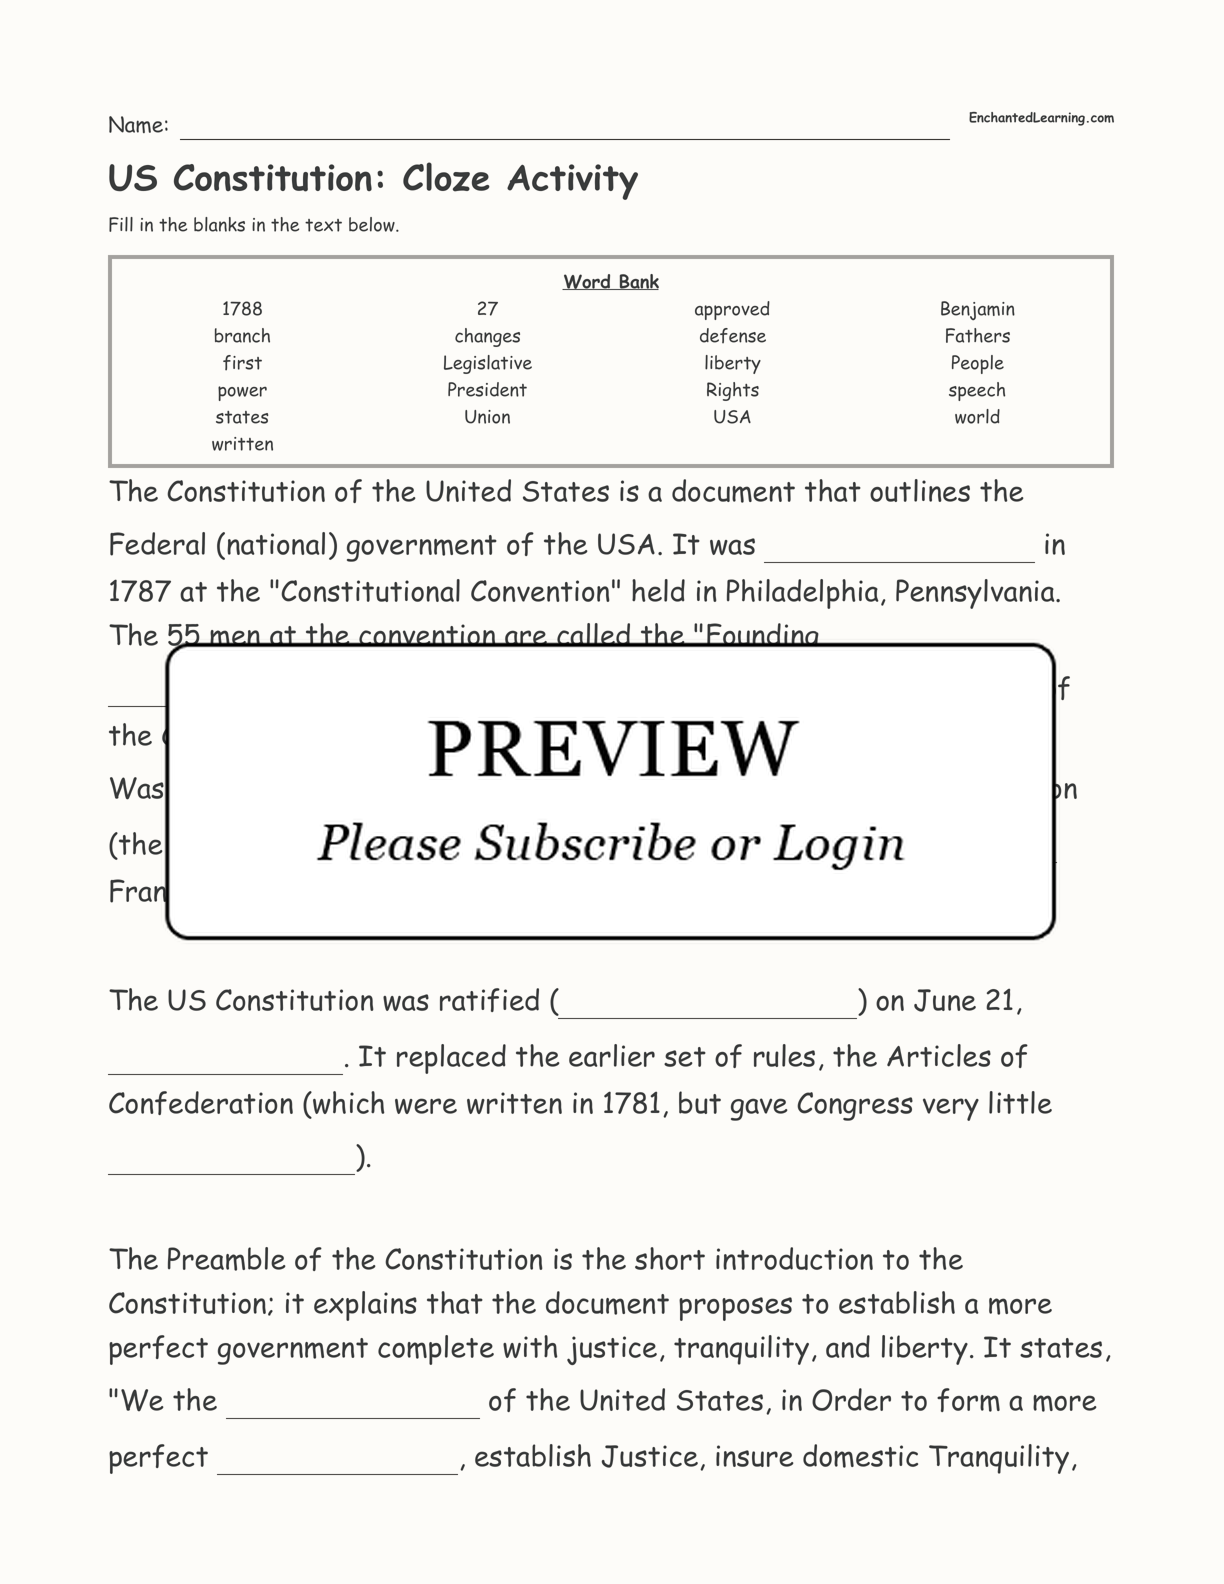 US Constitution: Cloze Activity interactive worksheet page 1